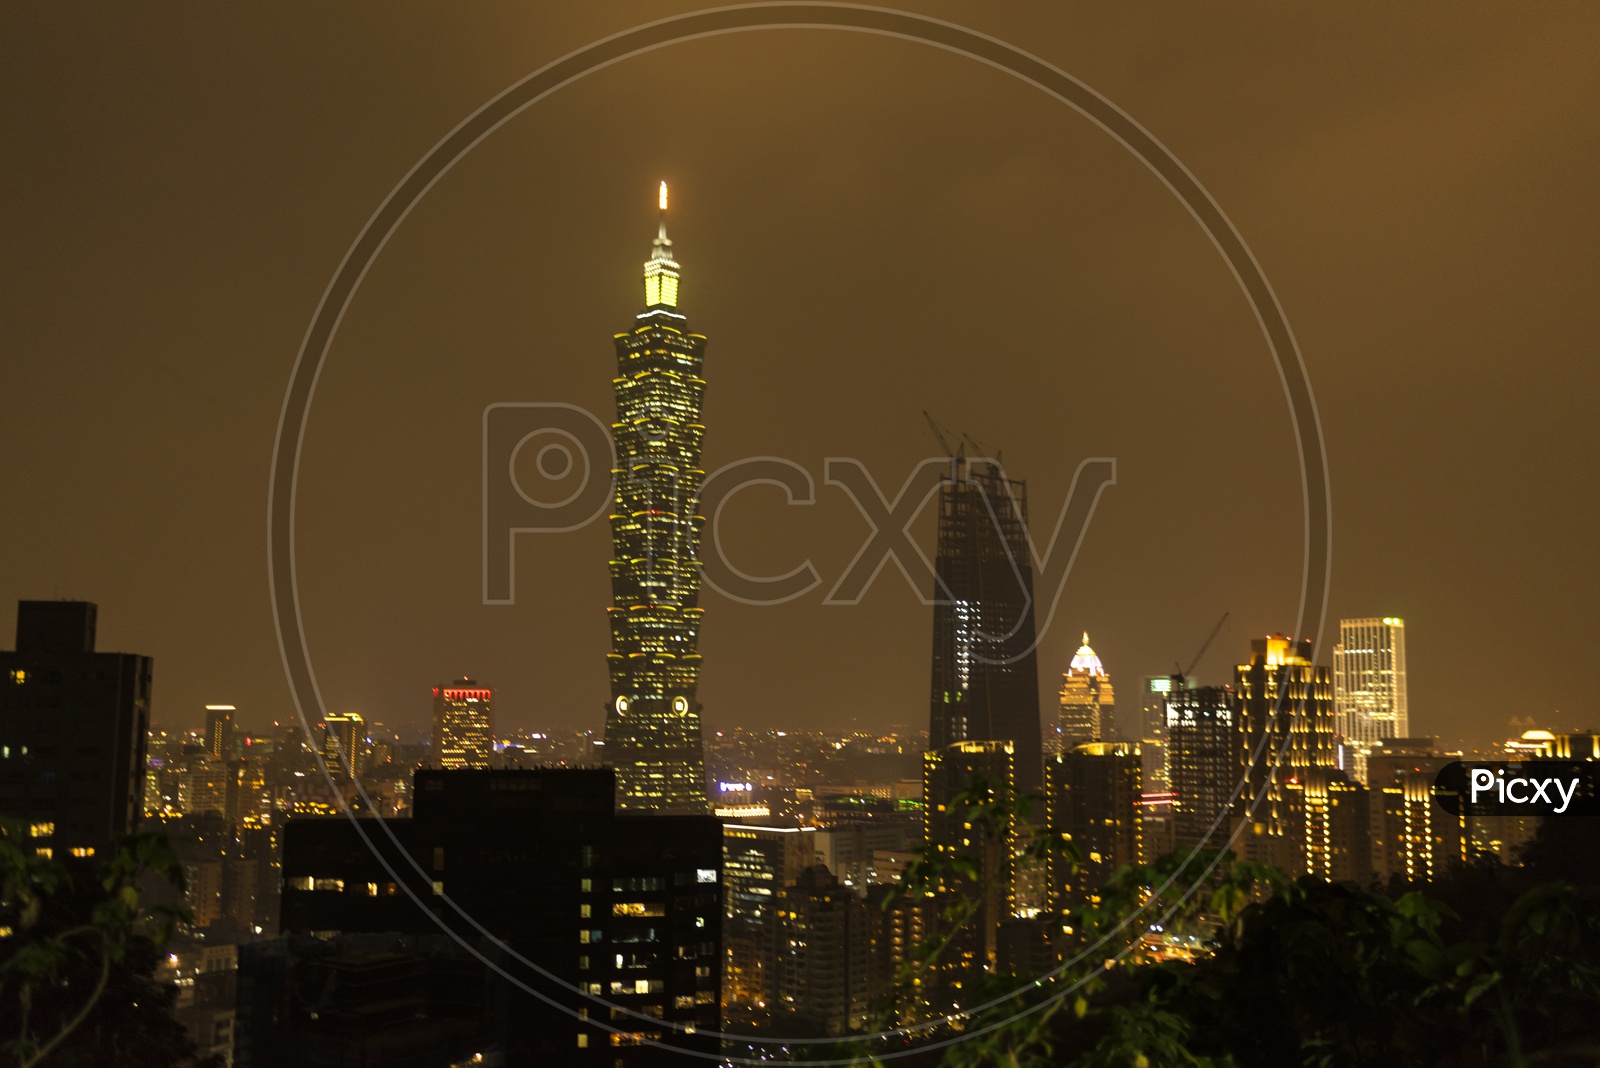 Taipei 101 building is a famous landmark was taken at sunset from elephant mountain